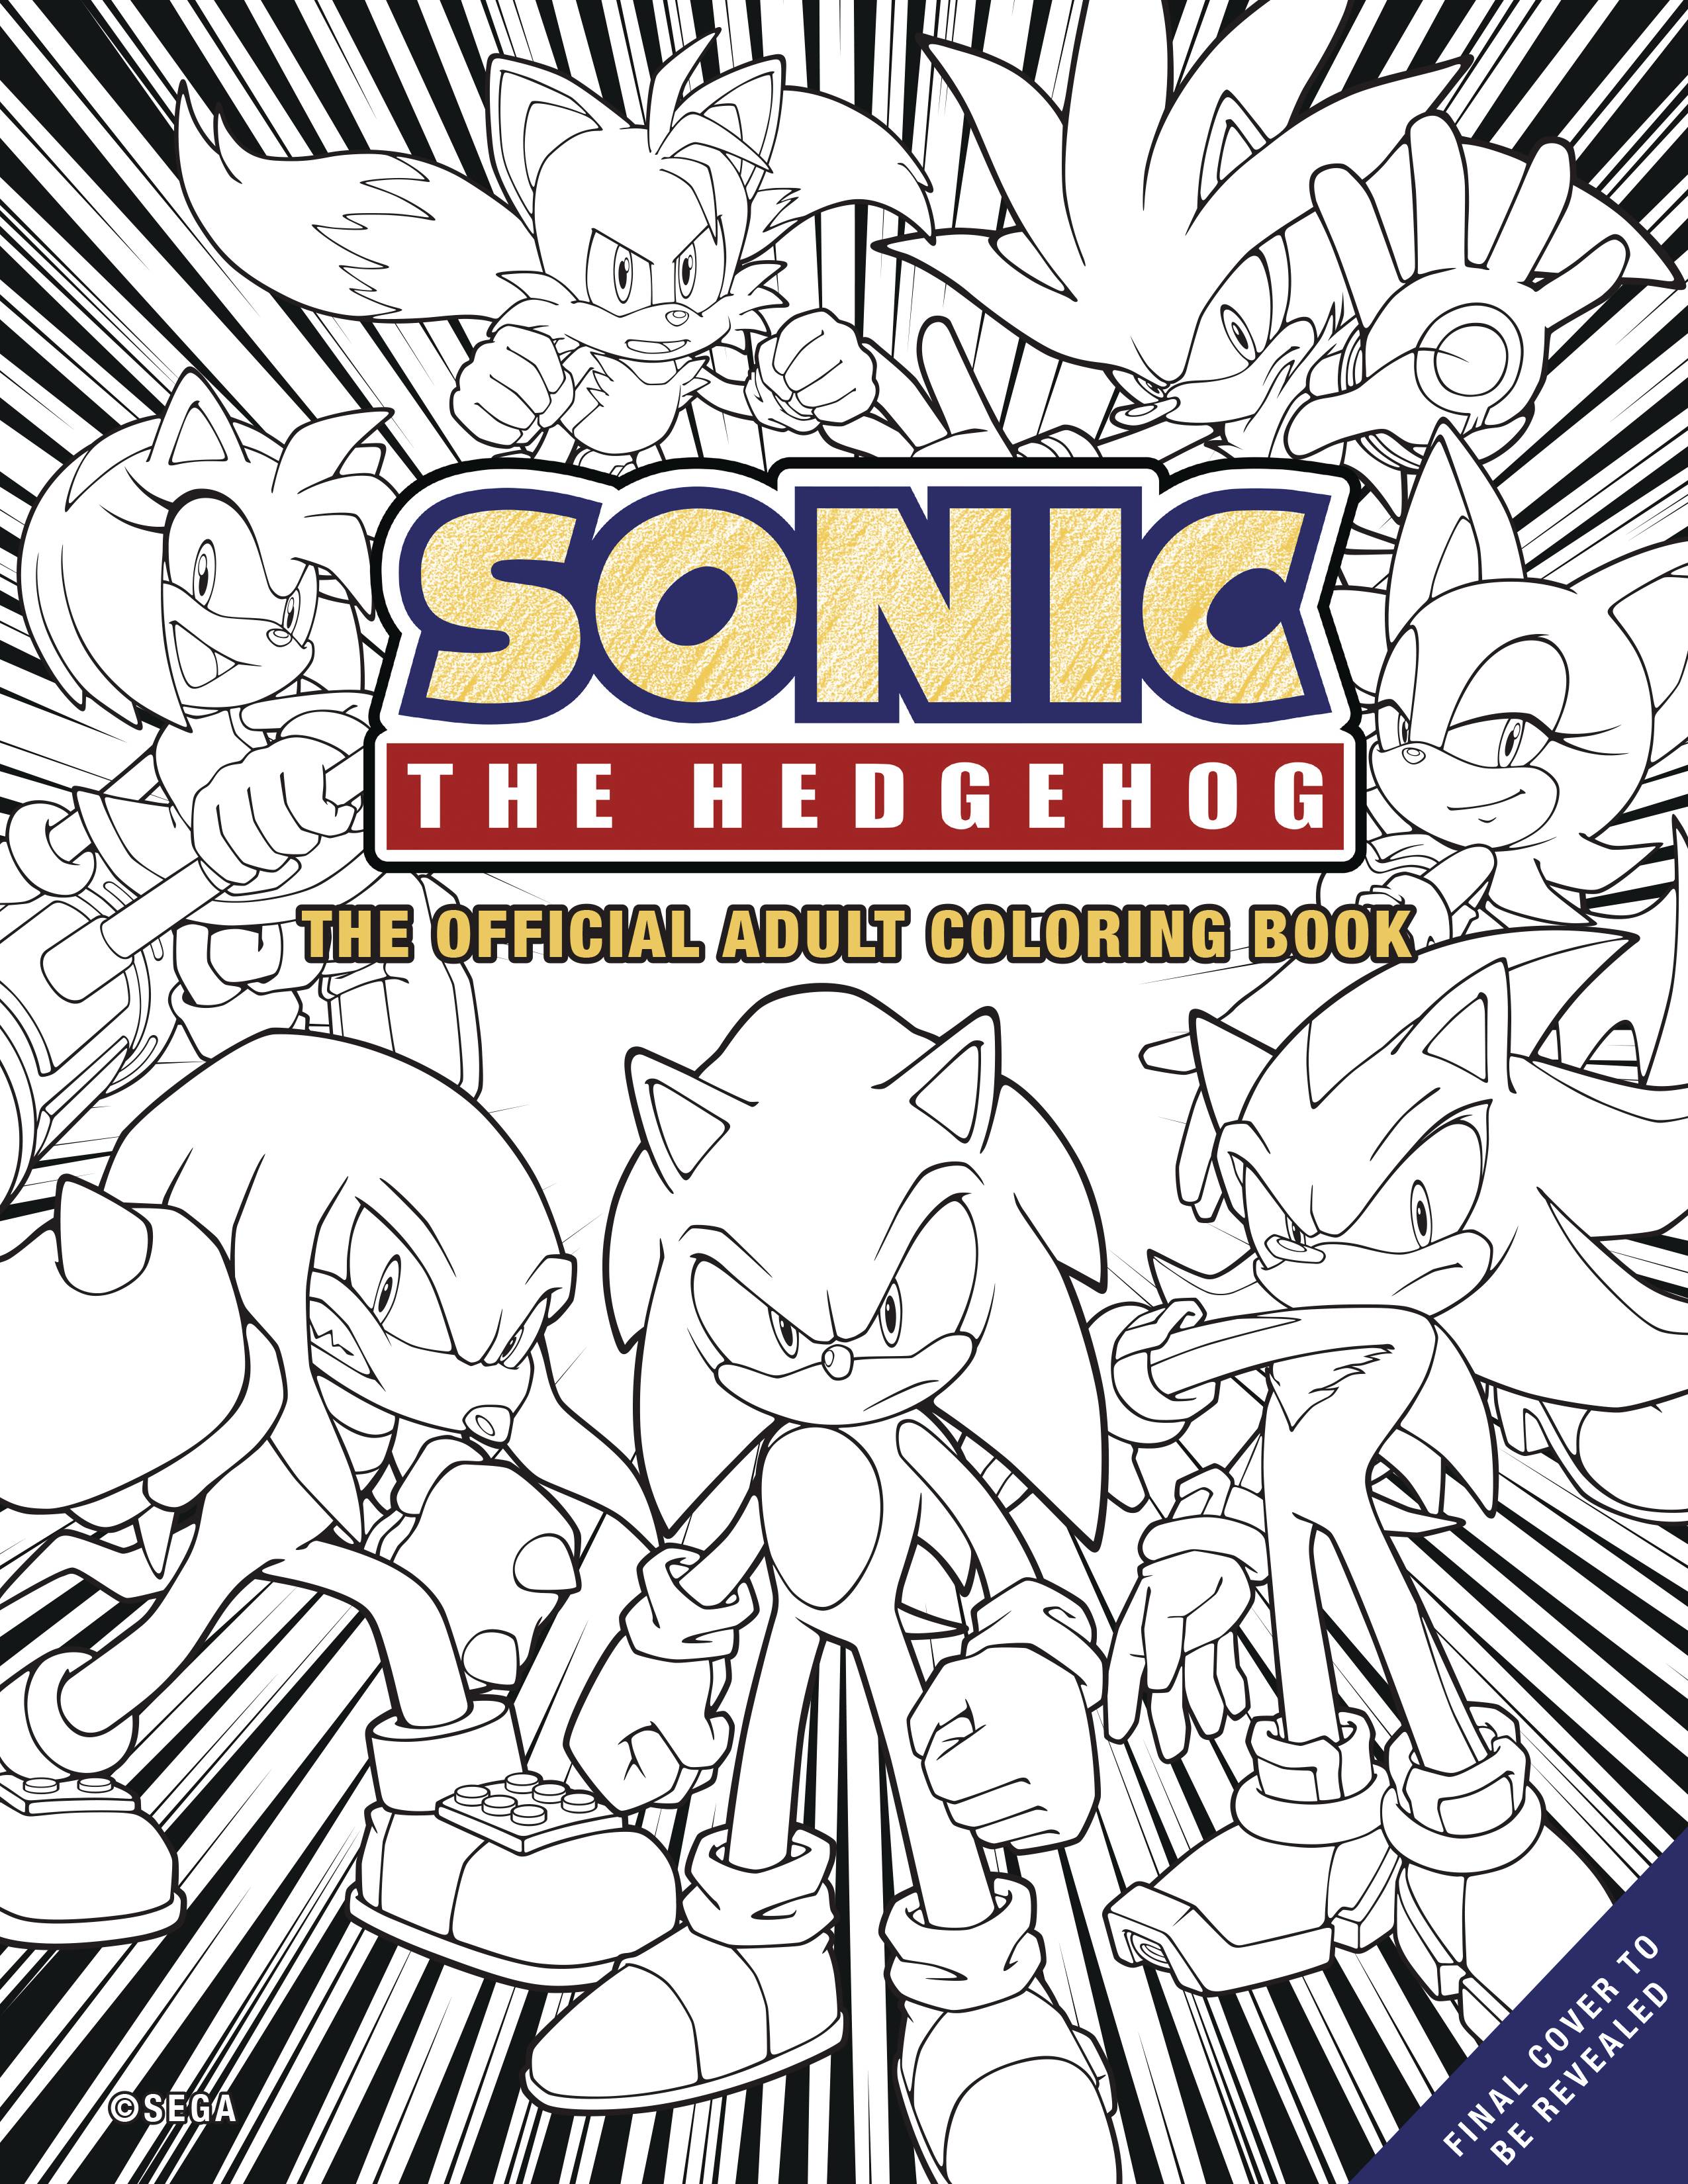 Aug221588 - Sonic The Hedgehog Official Coloring Book - Previews World